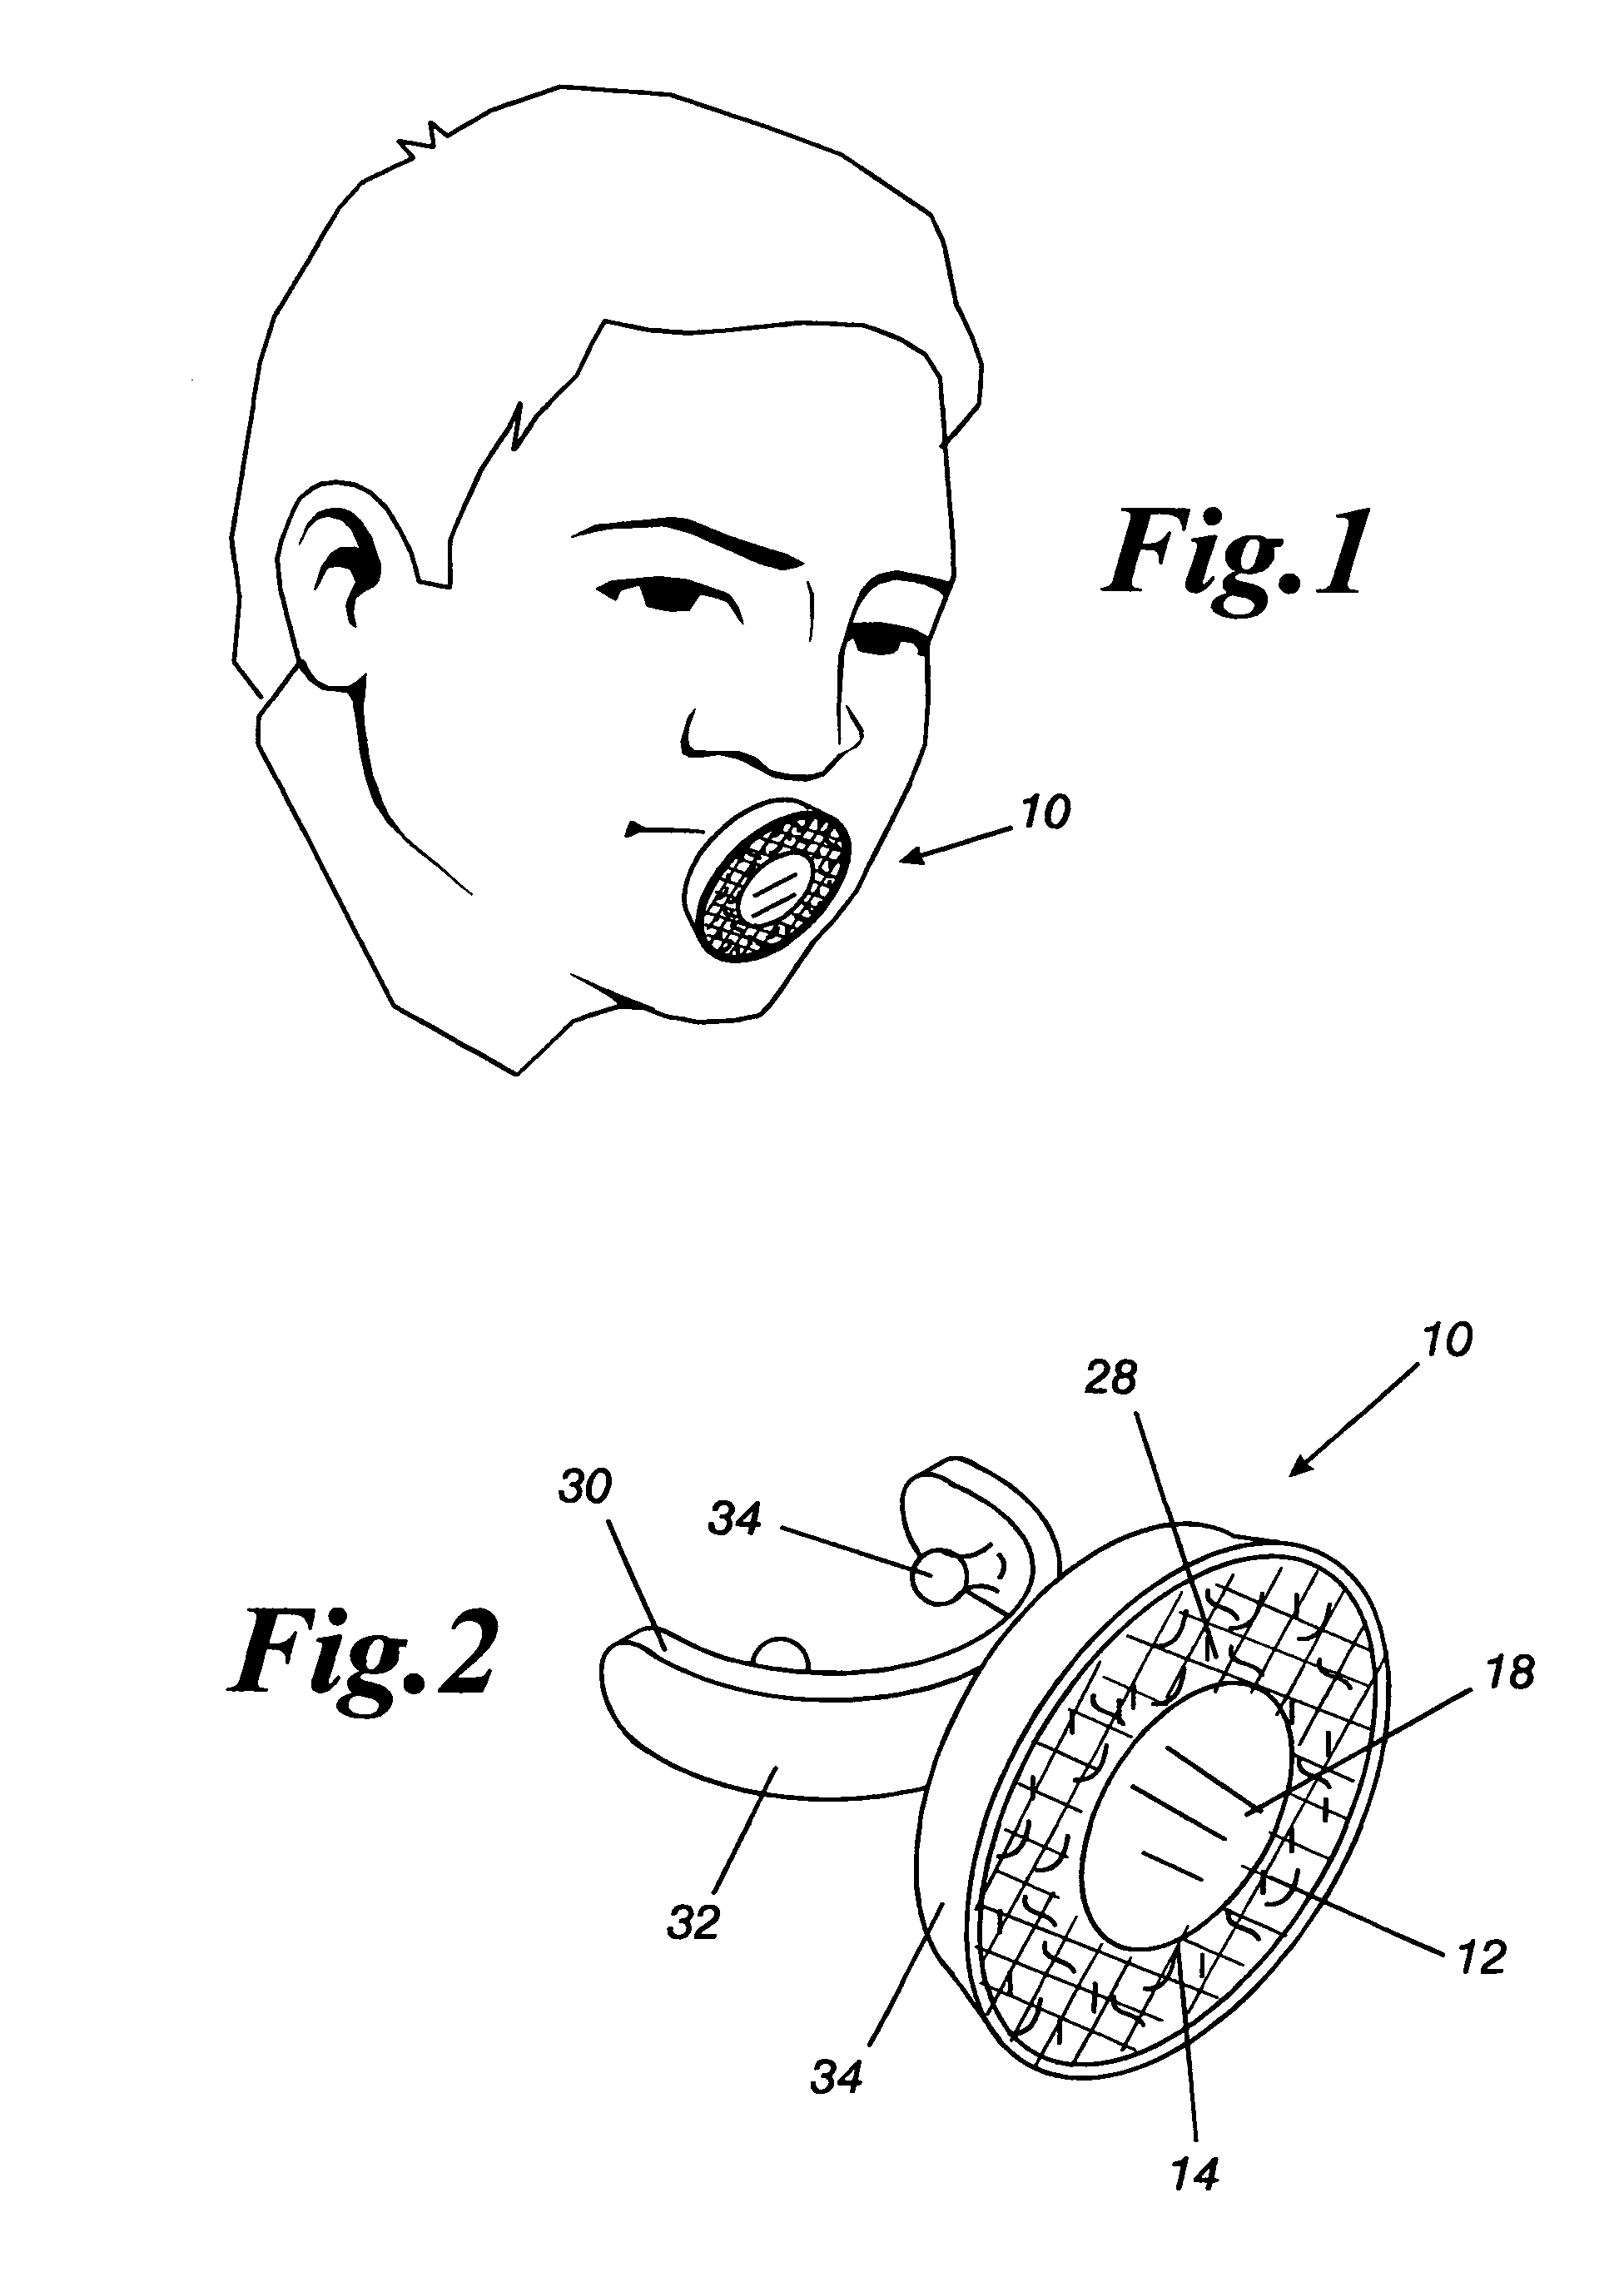 Personal breathing filter